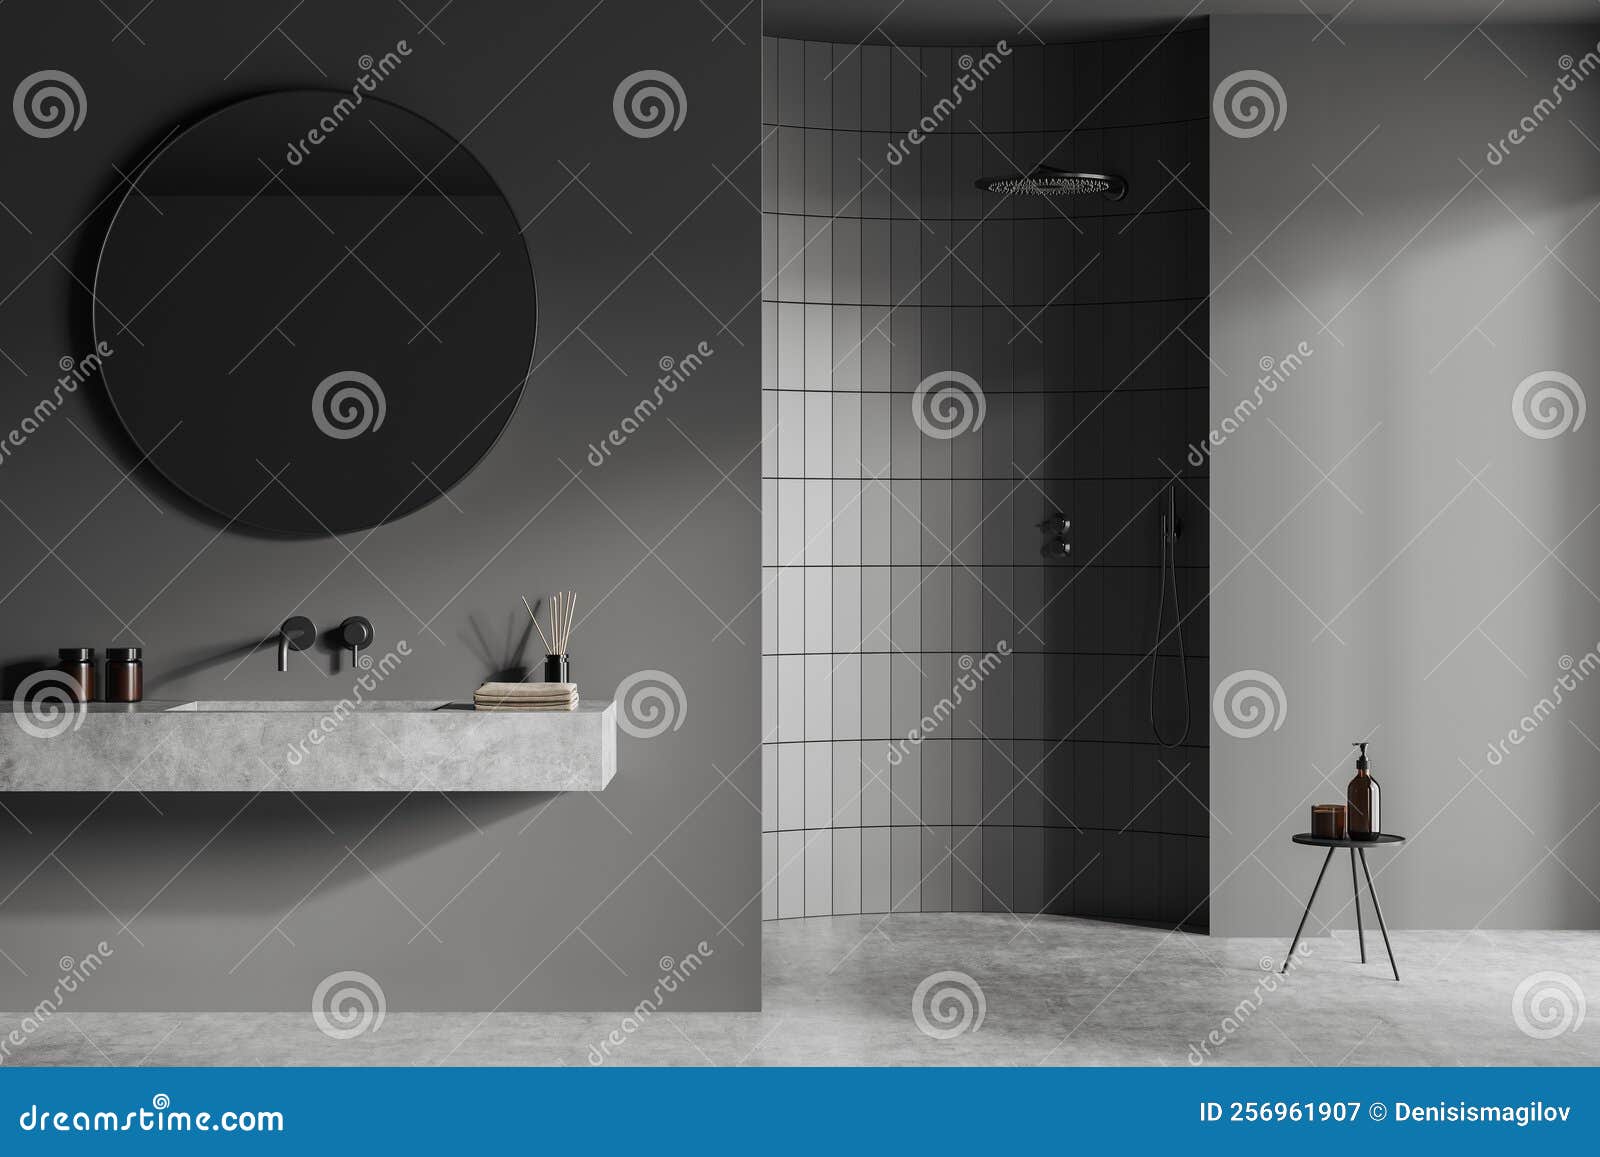 Front View on Dark Bathroom Interior with Large Round Mirror Stock ...